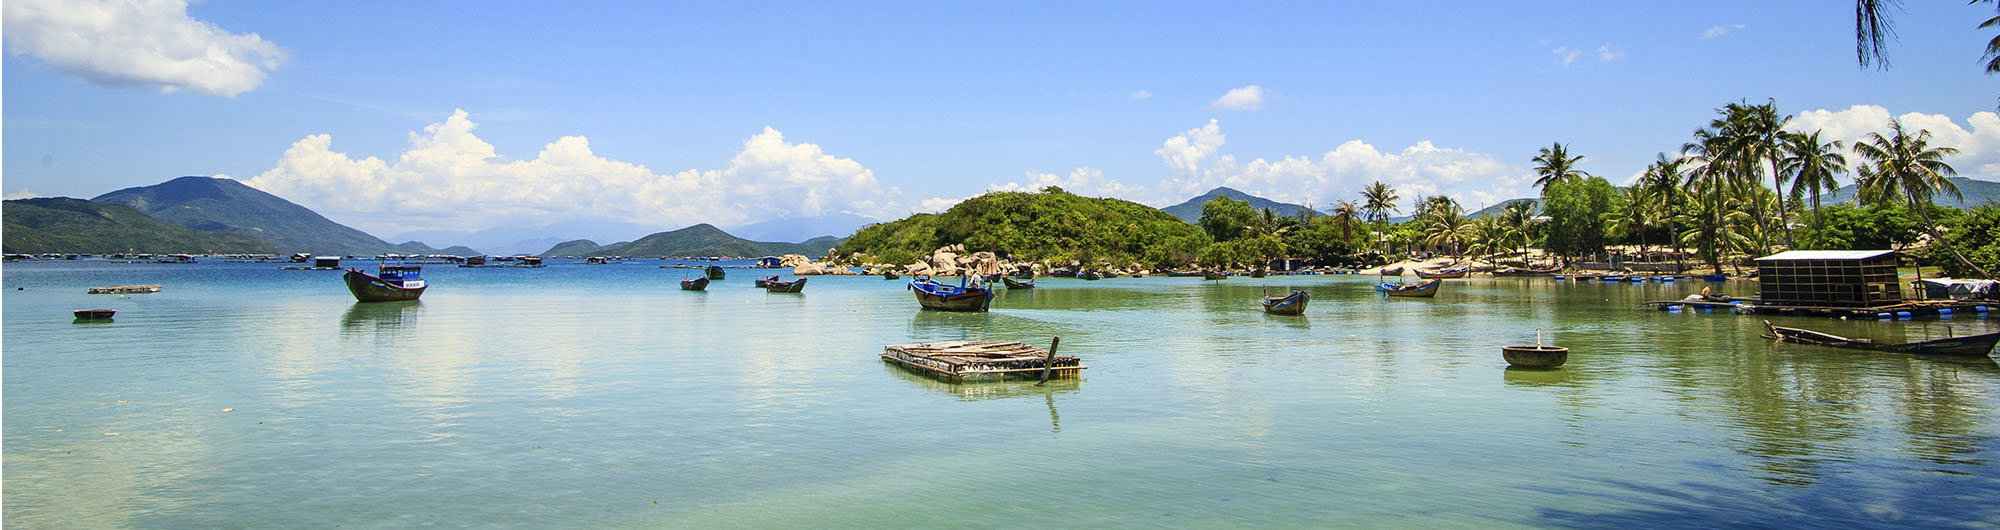 Search and compare cheap flights from Hồ Chí Minh to Nha Trang